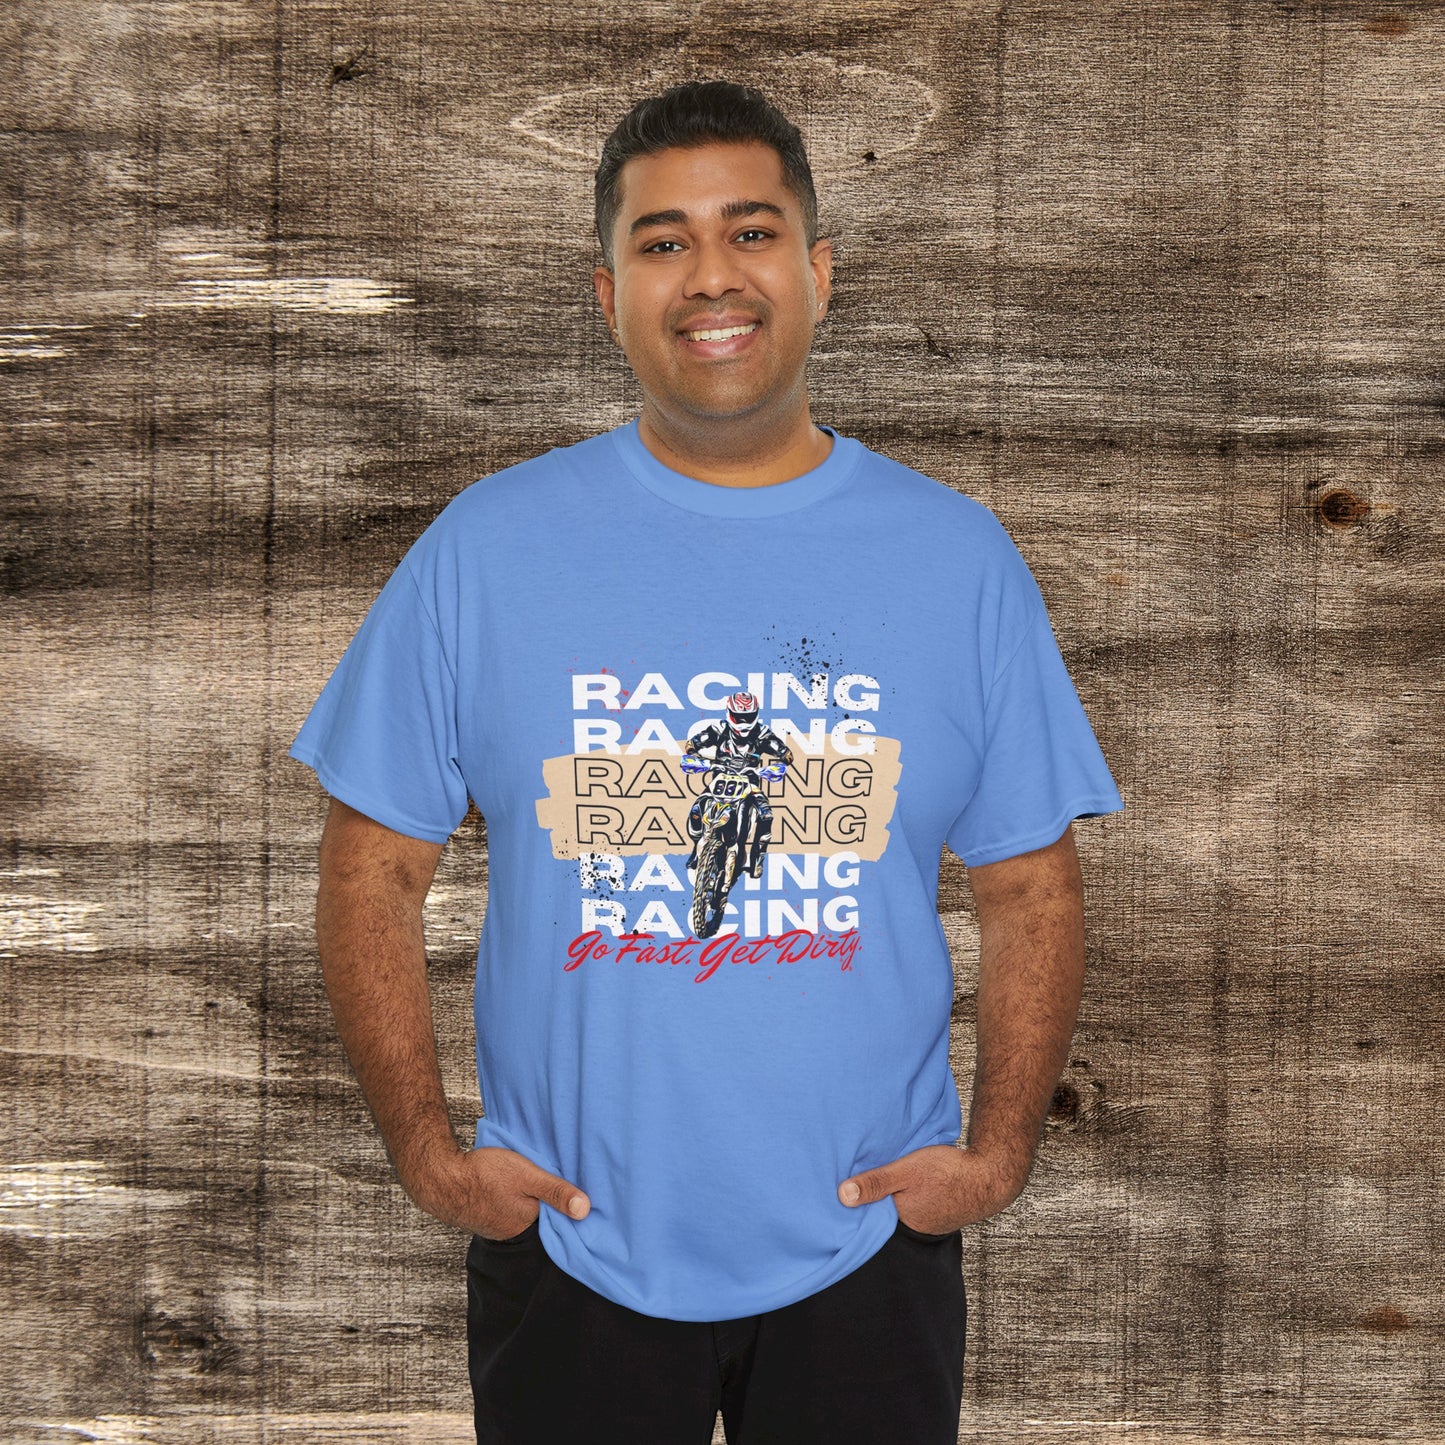 Mens Racing Shirt | Man on KTM 300 Dirt bike and the words RACING and Go Fast Get Dirty | HEAVY Cotton Adult Unisex t shirt | Dirt bike shirt for men